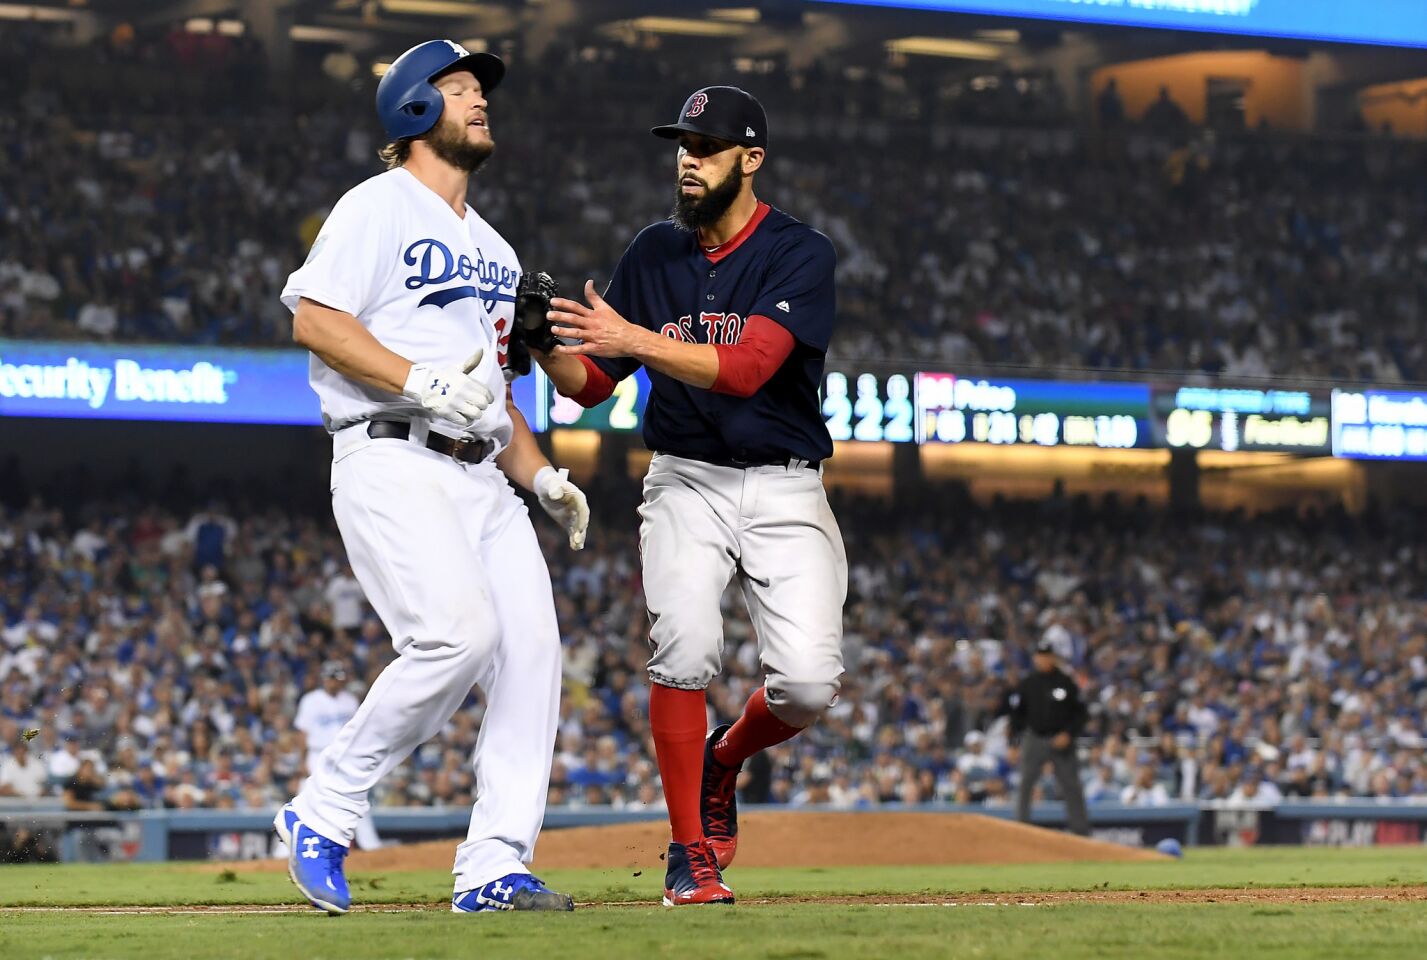 Dodgers pitcher Clayton Kershaw is tagged out by Red Sox pitcher David Price at 1st base to end the 5th inning.